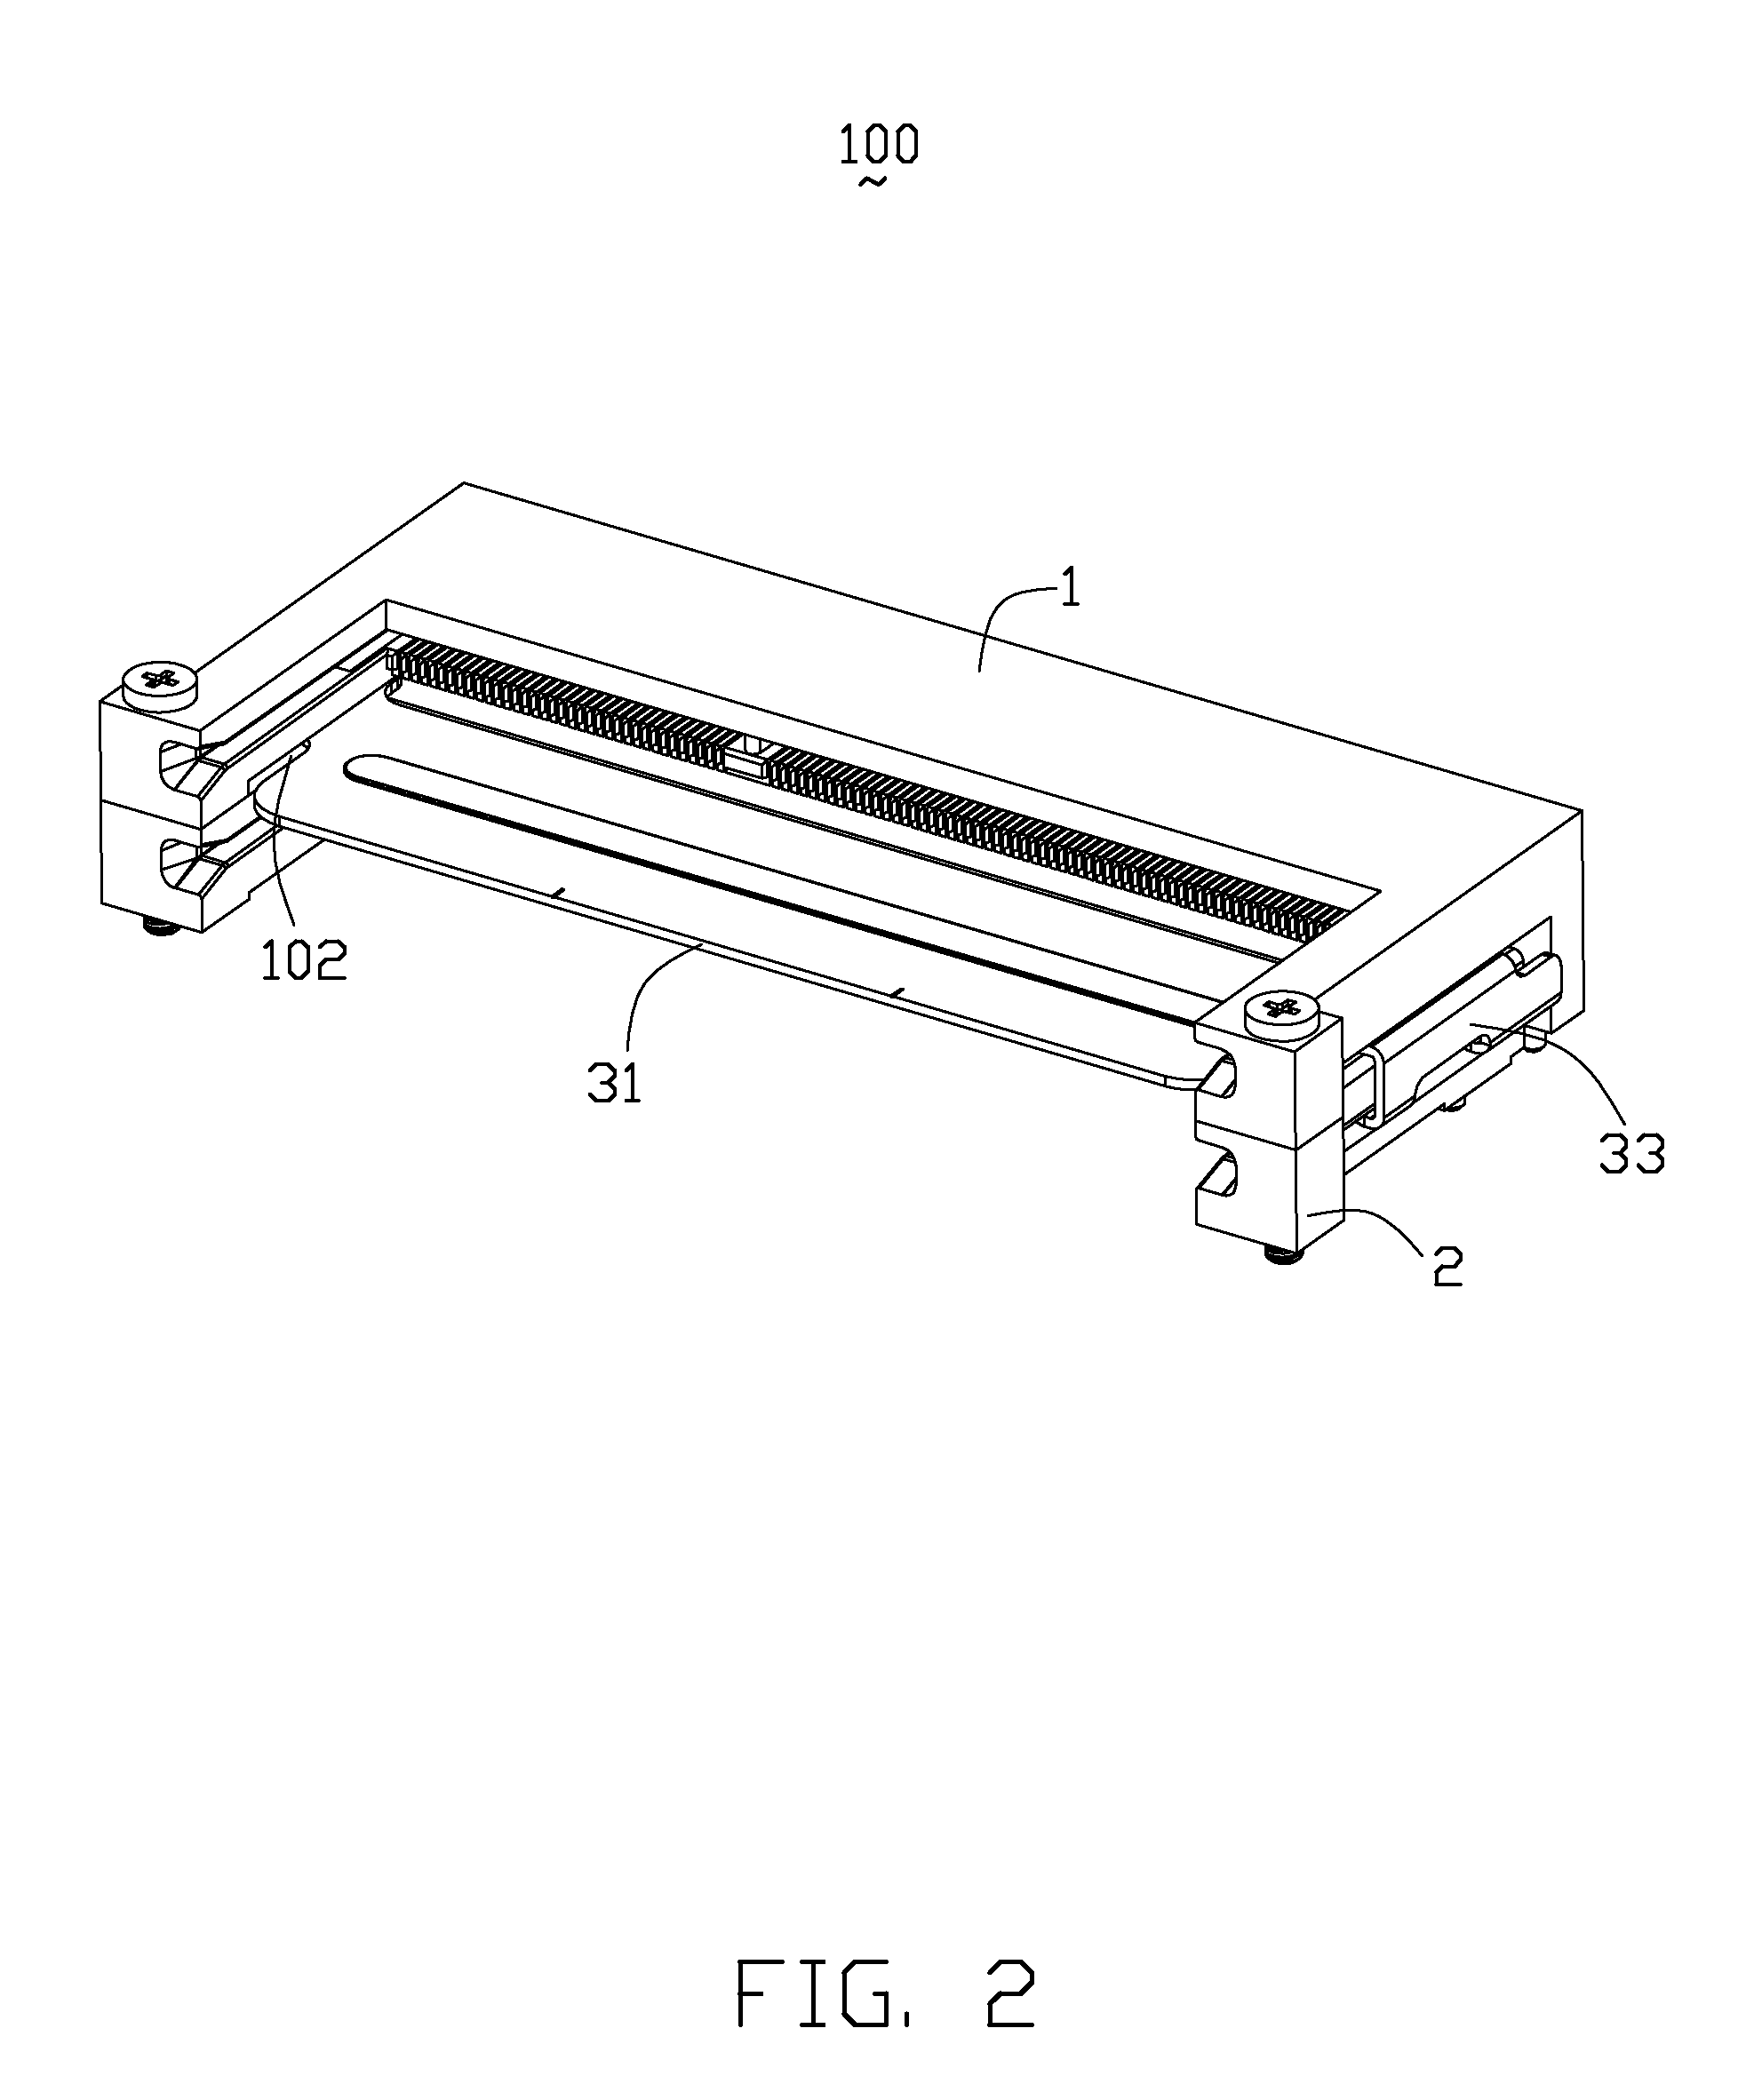 Stacked card edge connector assembly having ejector for removing inserted cards simultaneously